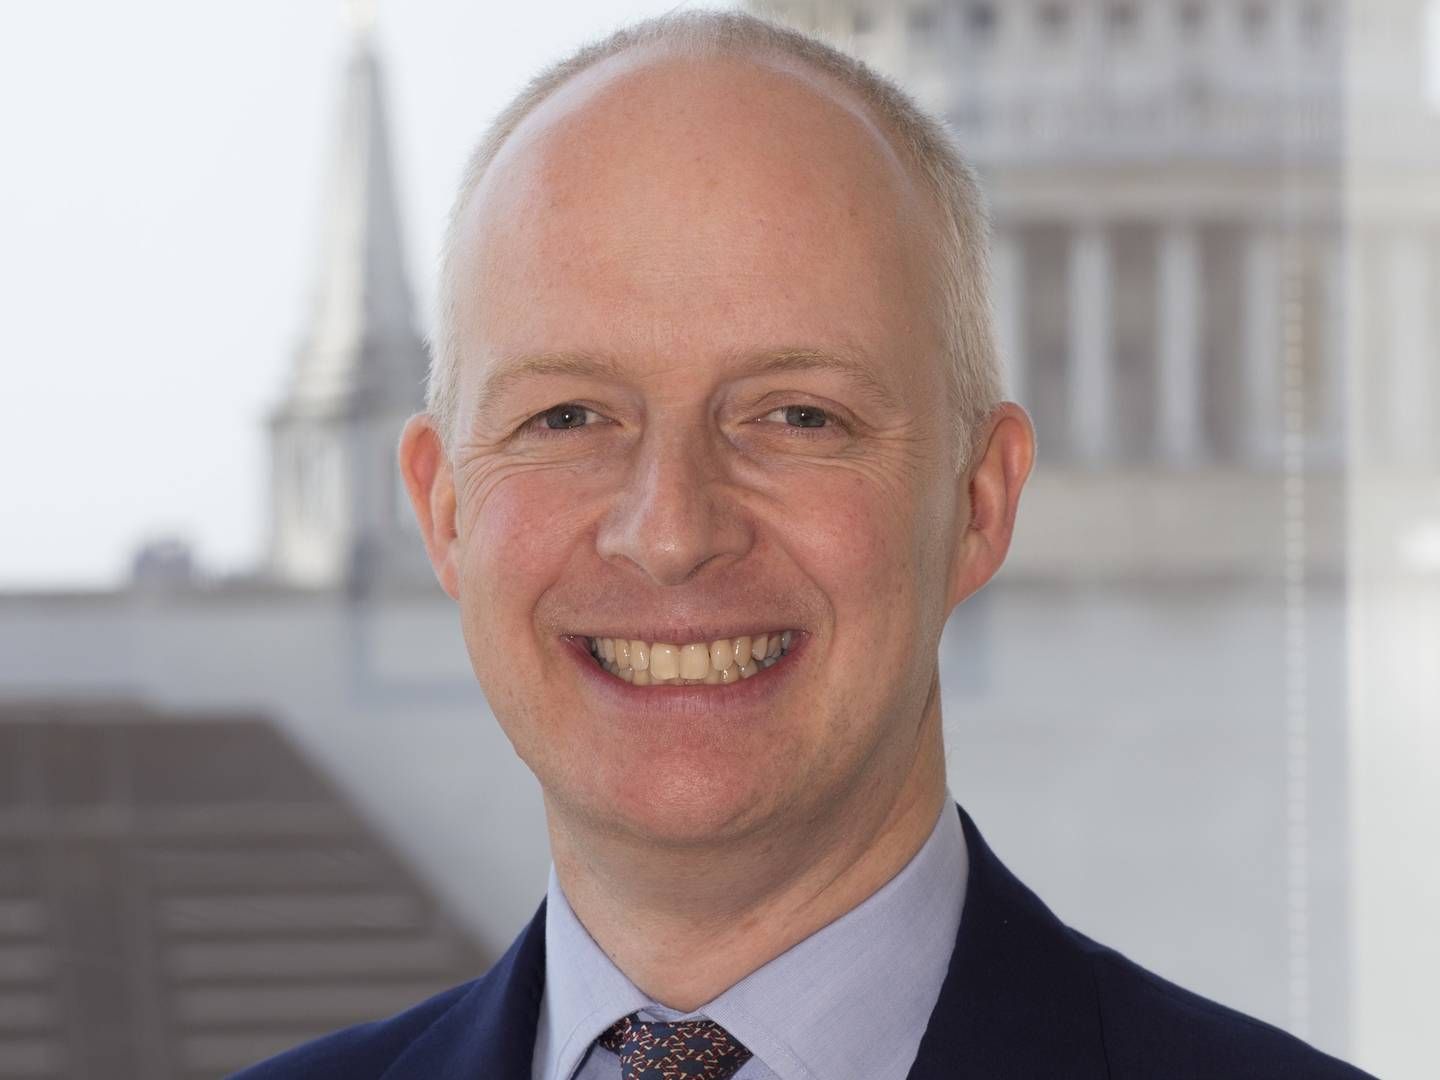 "Clients increasingly want to invest in themes which they have an intellectual and emotional connection to, and I believe that clients feel increasingly empowered to invest in areas of high importance to them," says David Docherty, investment director, thematics, at Schroders. | Photo: PR / Schroders